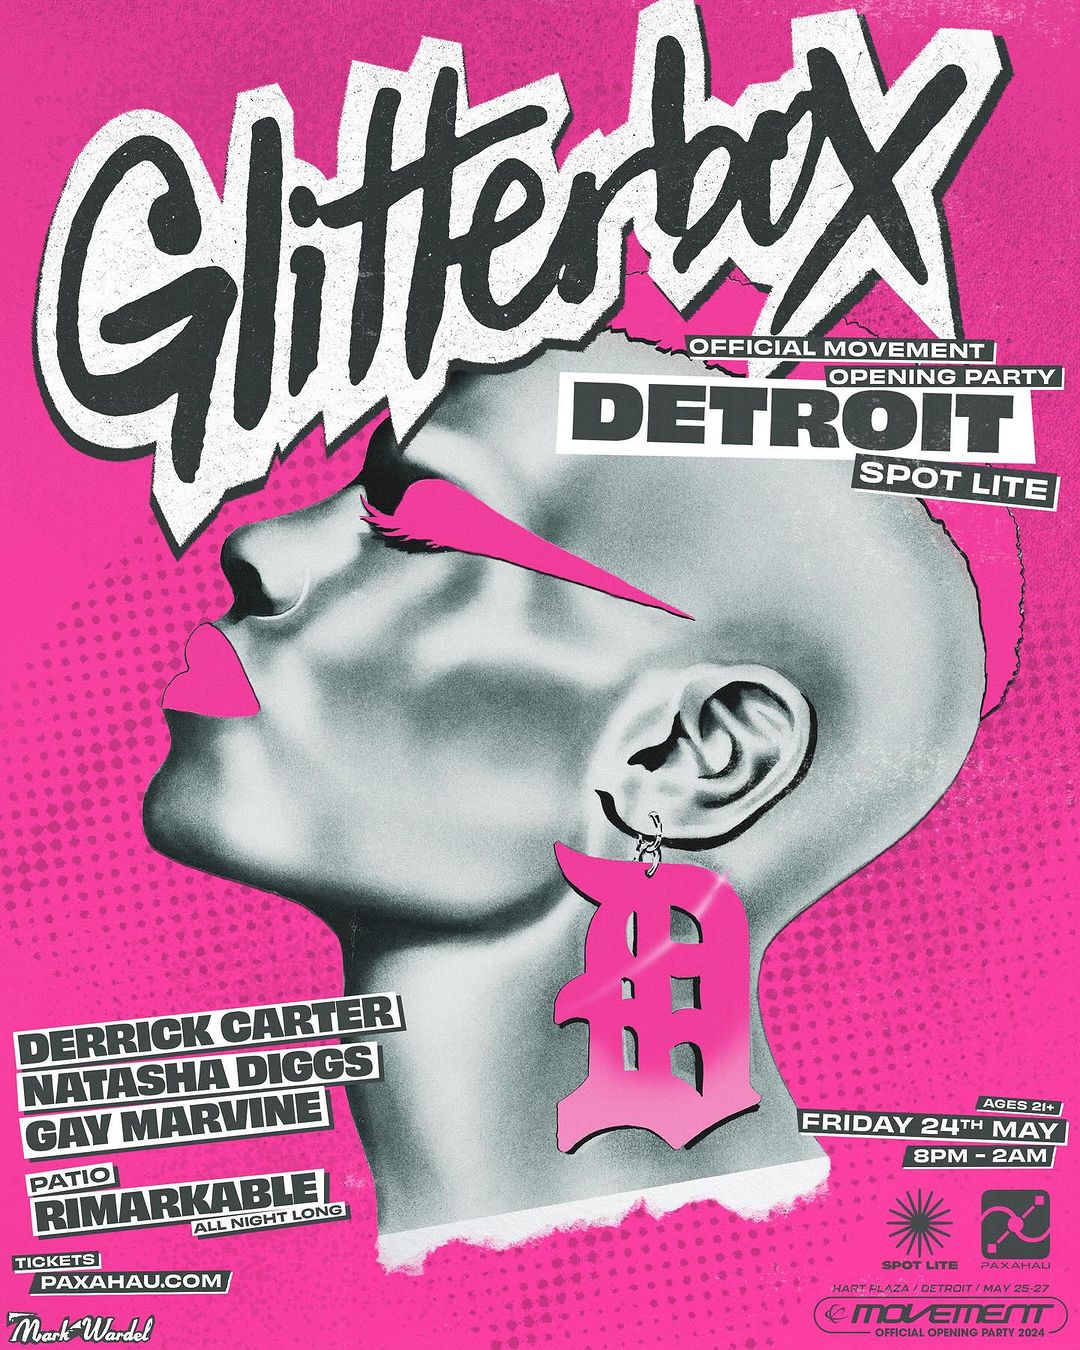 Glitterbox – Official Movement Opening Party